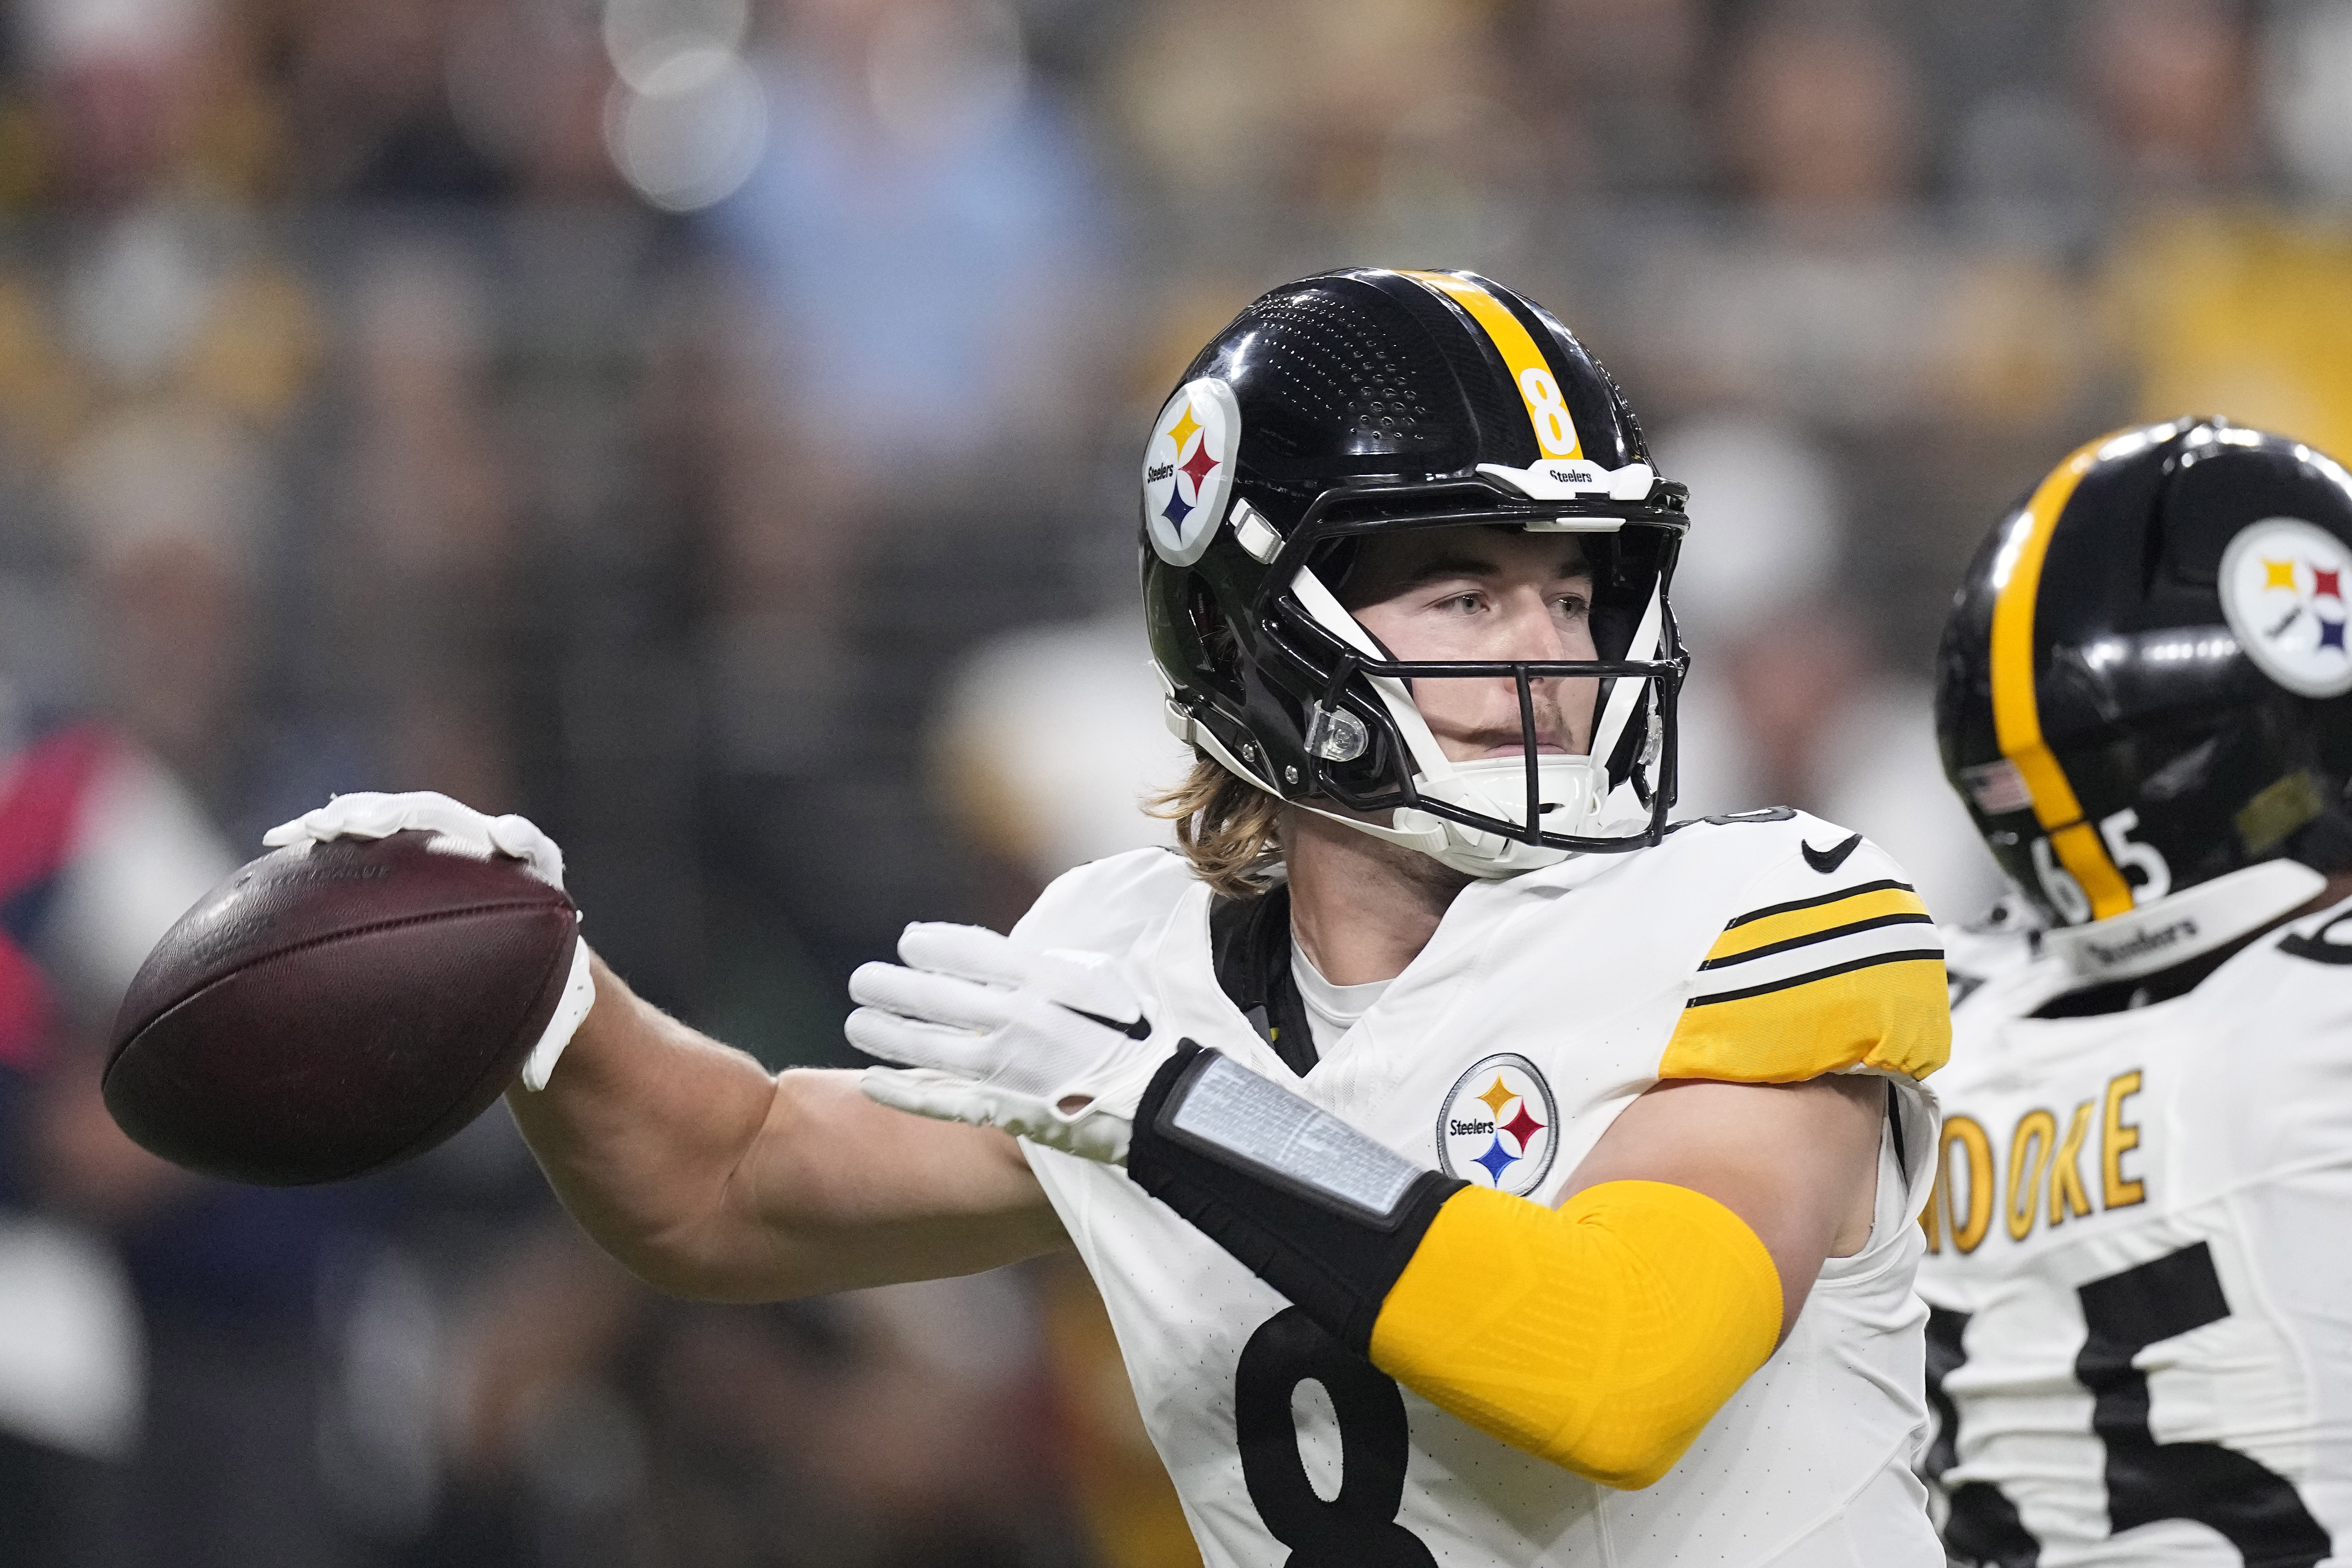 where to watch pittsburgh steelers game today